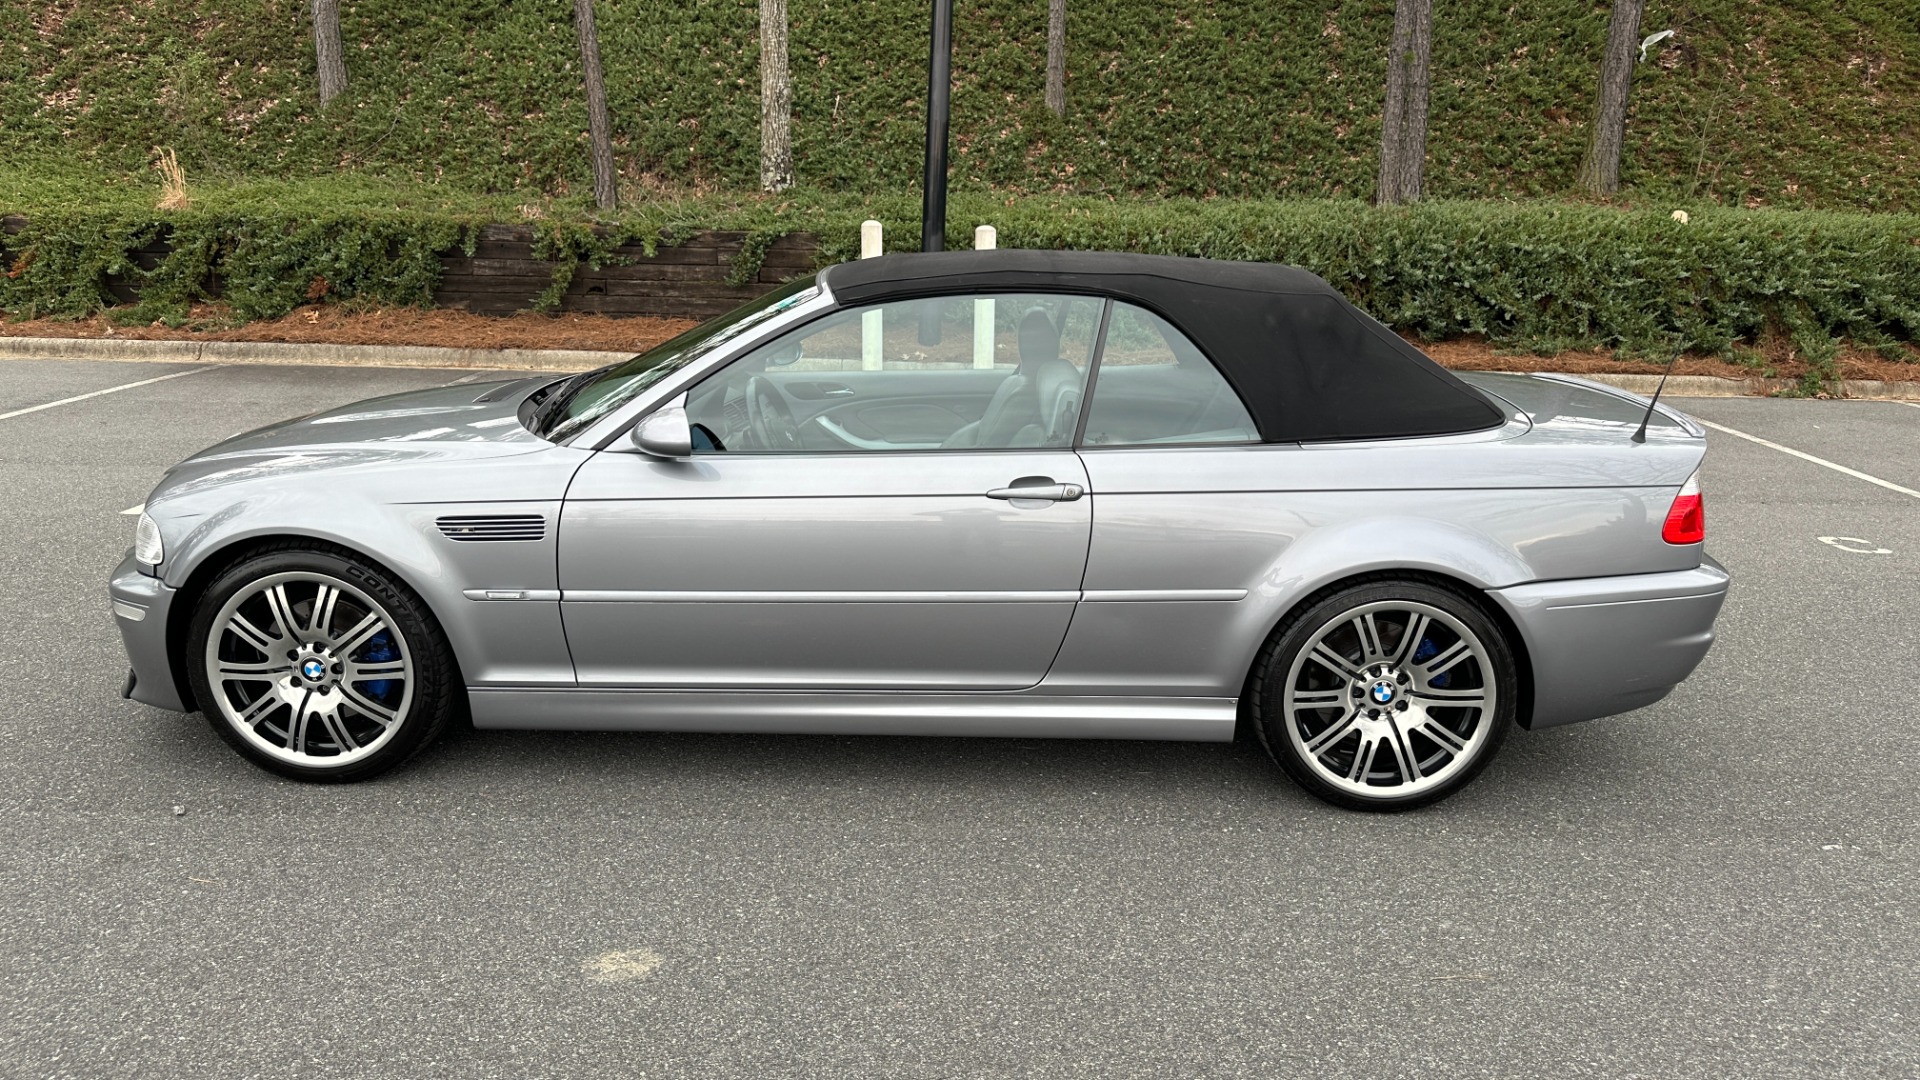 Used 2006 BMW M3 CONVERTIBLE / SMG AUTO / LEATHER / INLINE 6CYL / CARBON FIBER for sale $26,995 at Formula Imports in Charlotte NC 28227 37